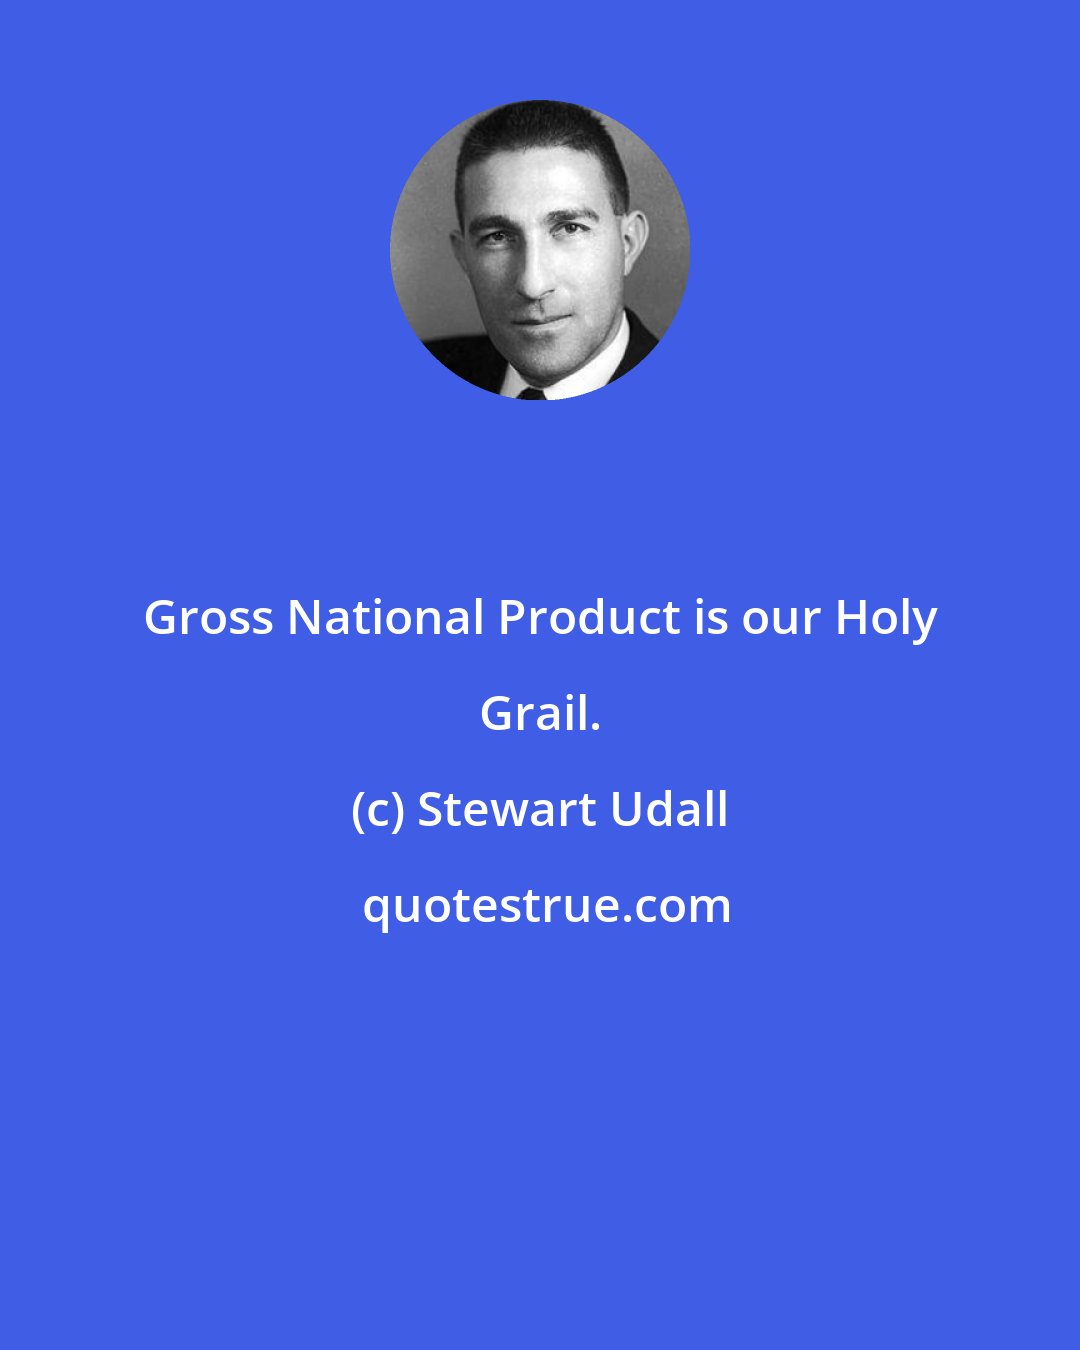 Stewart Udall: Gross National Product is our Holy Grail.